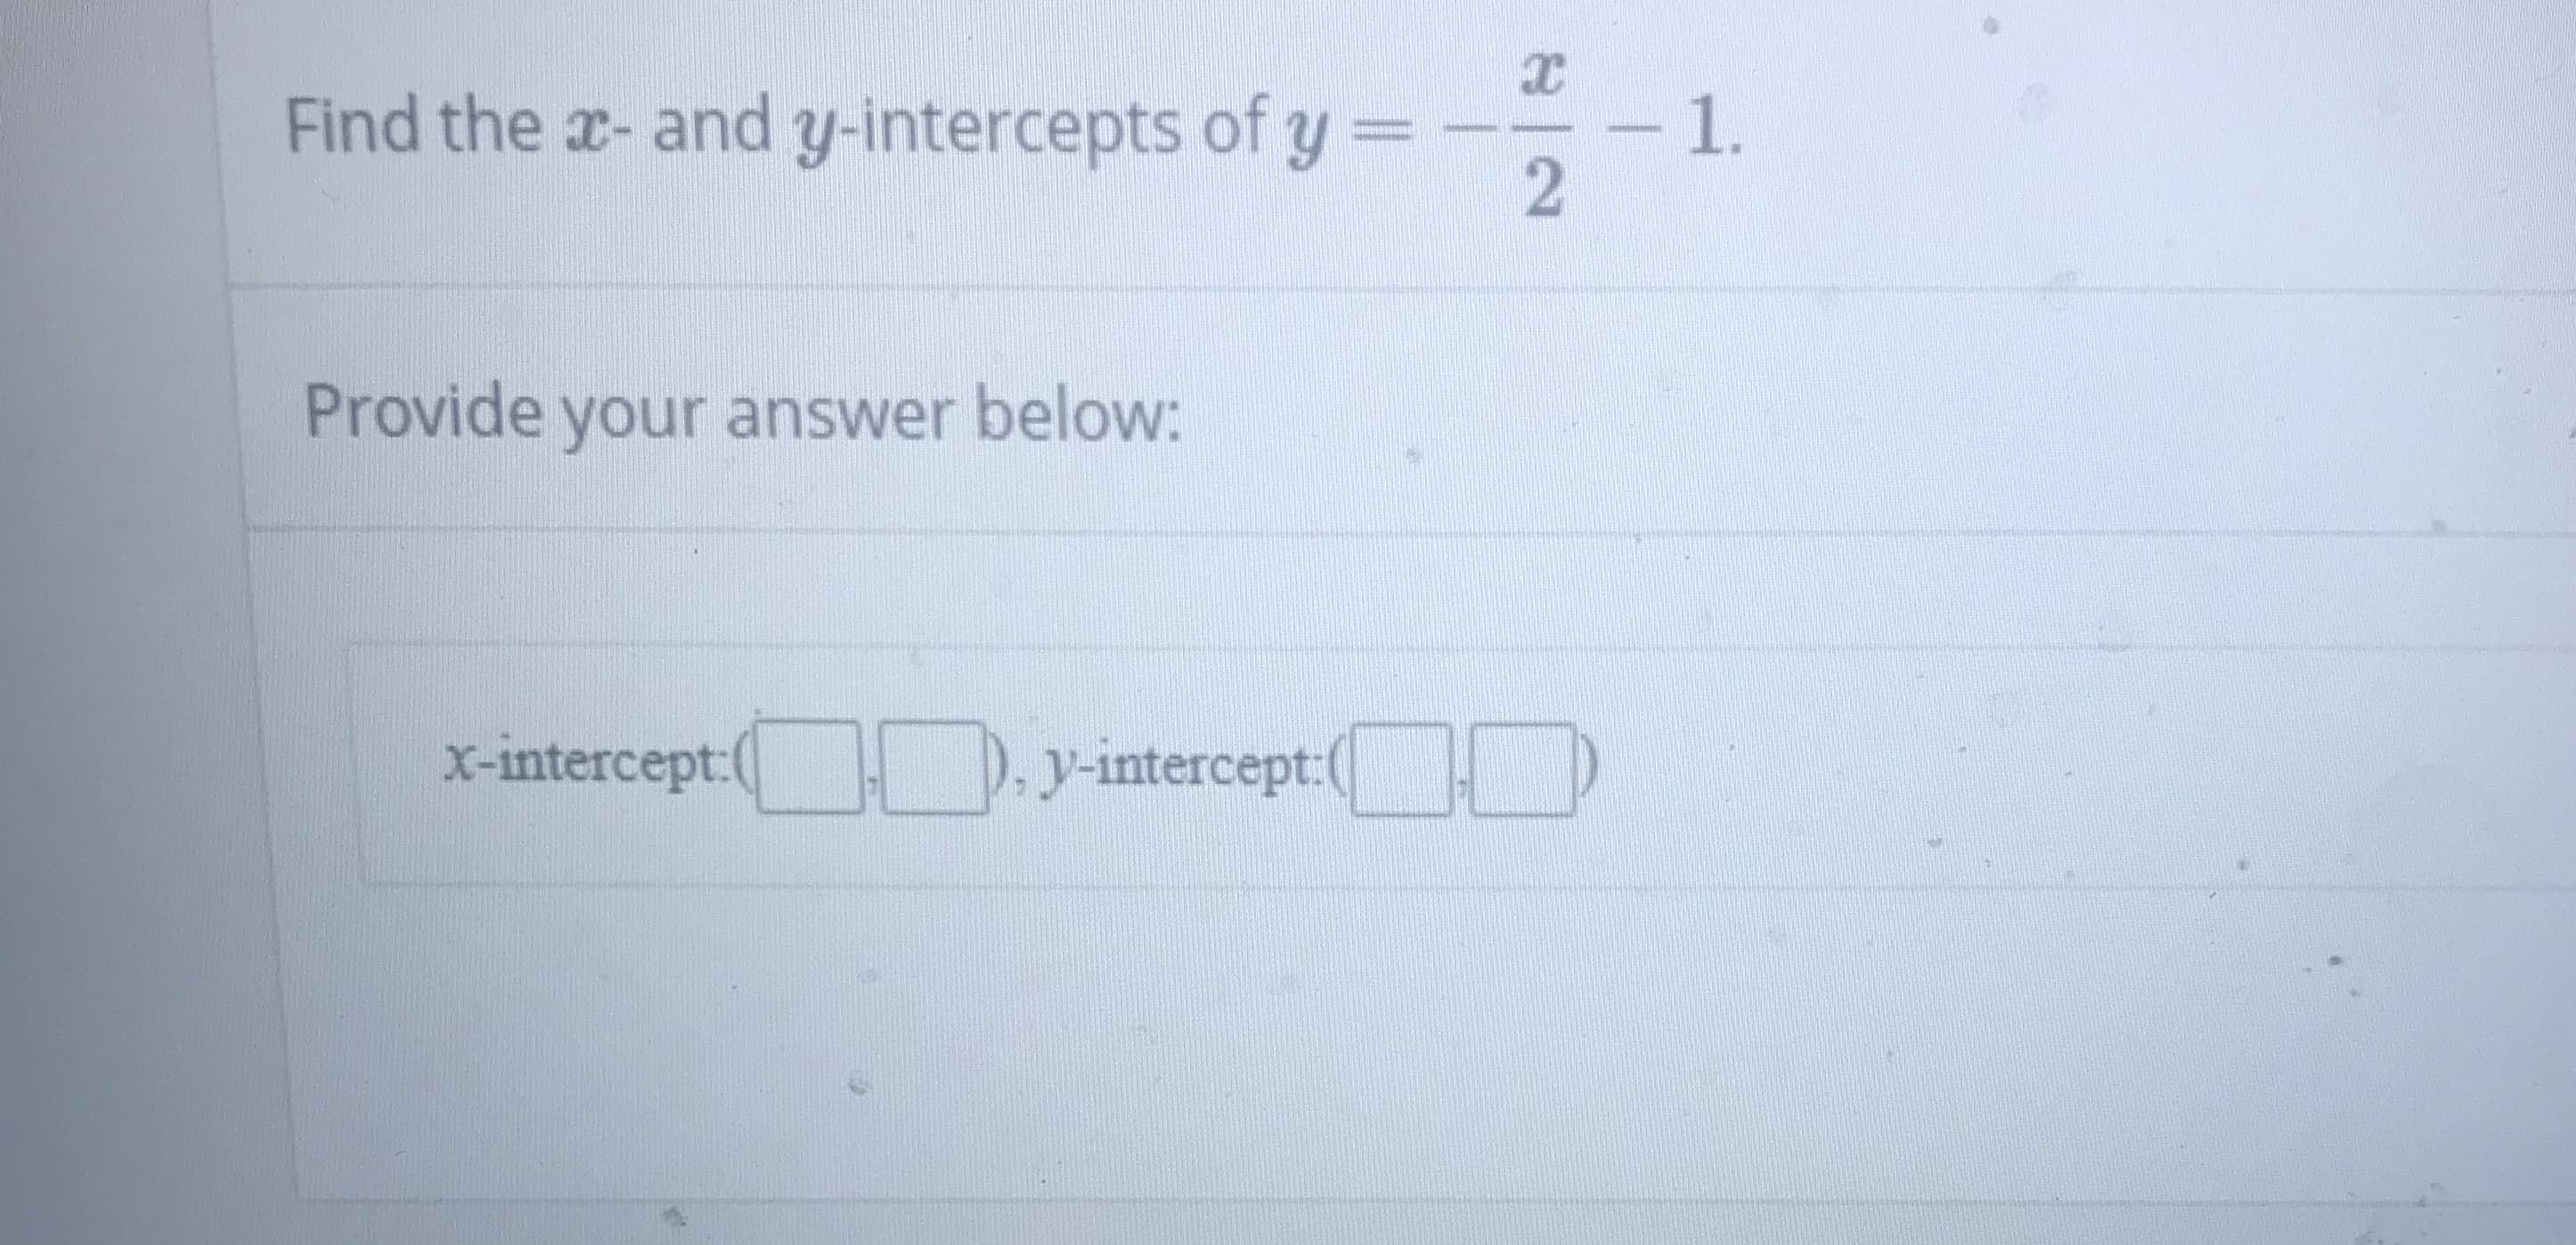 Find the x- and y-intercepts of y
1.
2
Provide your answer below:
y-intercept:(
